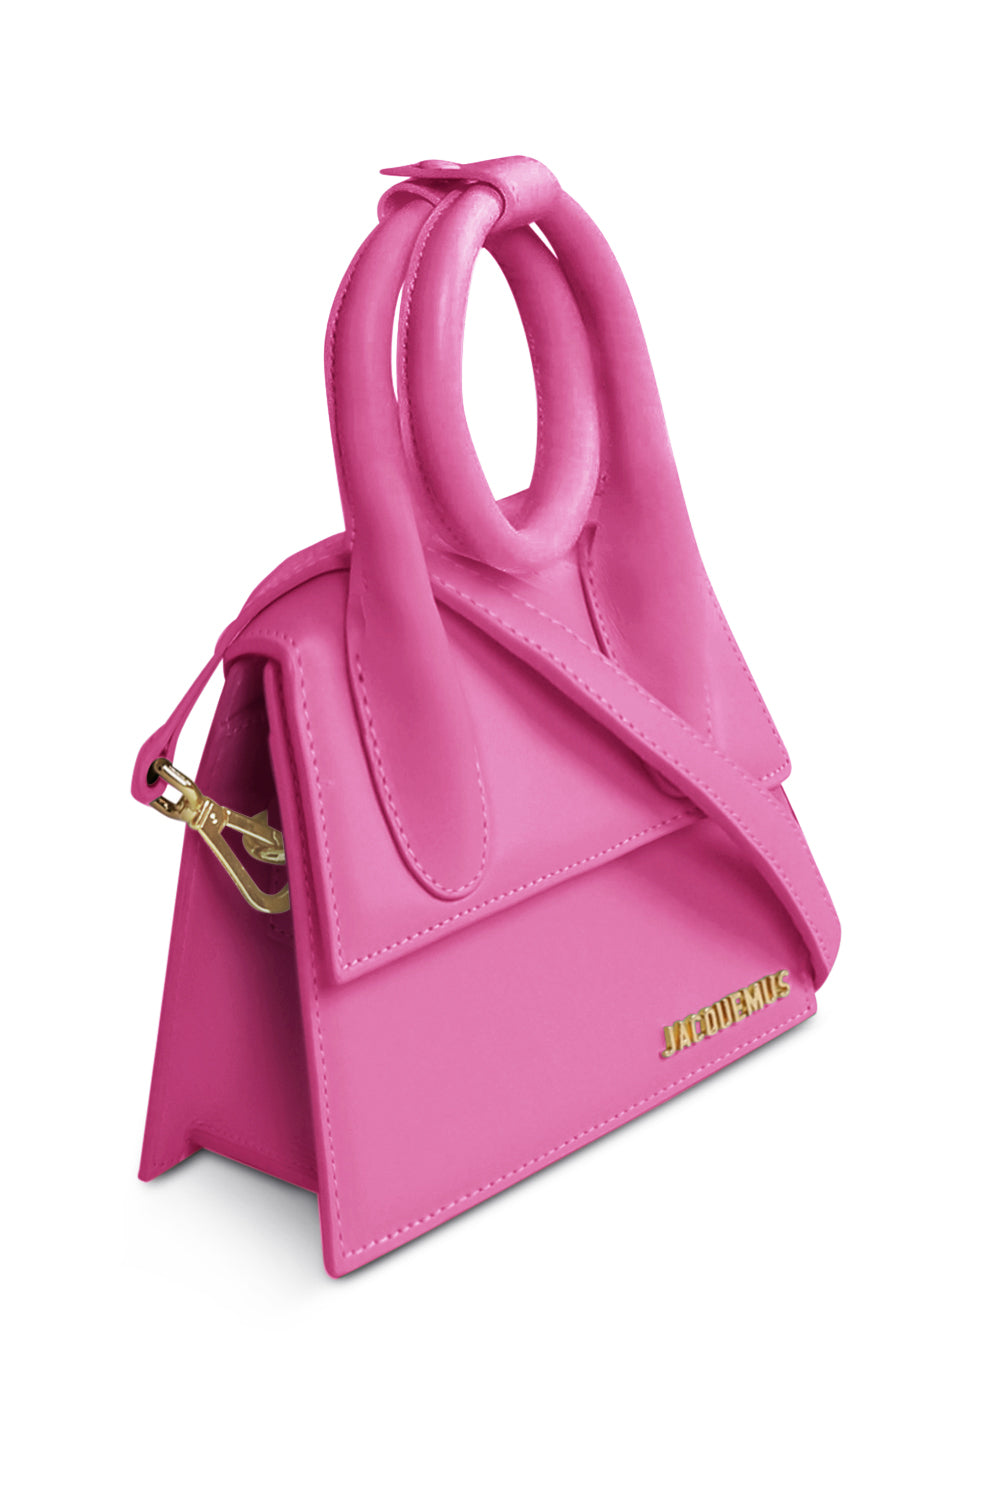 JACQUEMUS BAGS PINK LE CHIQUITO NOEUD BAG | PINK